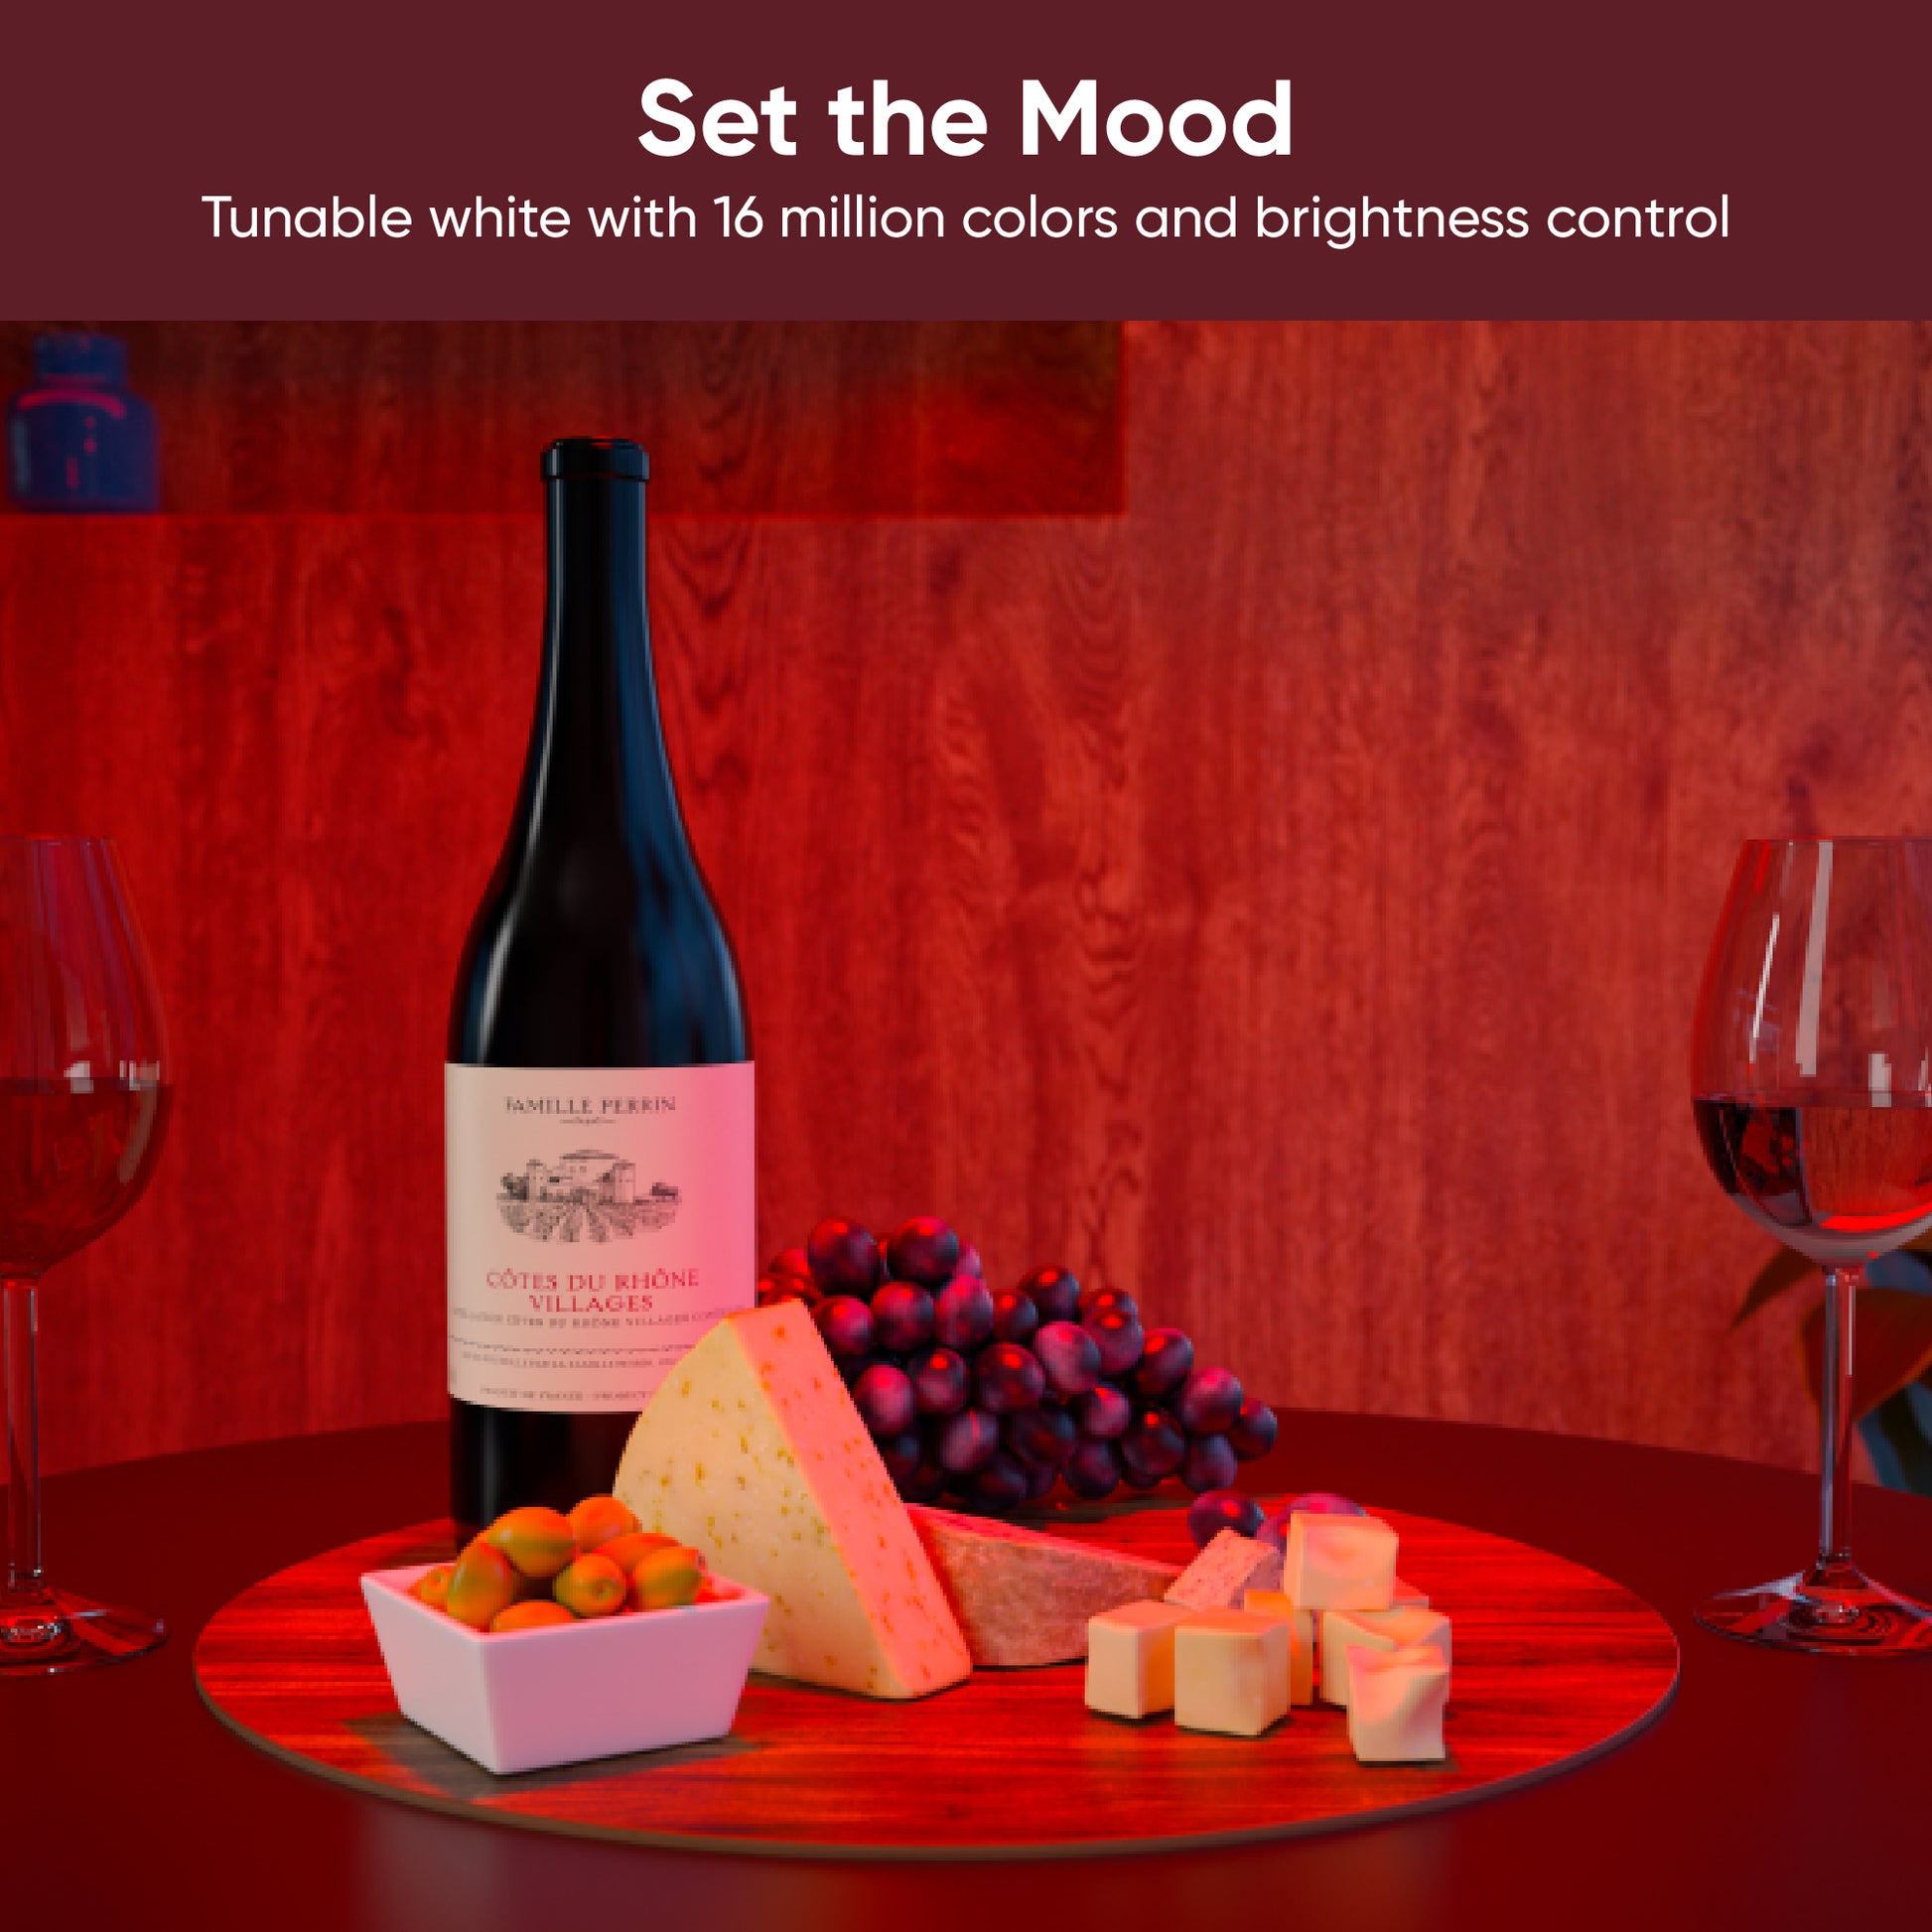 Kitchen table with wine and horderves being lit by a red light. White text overlay that says "Set the Mood."